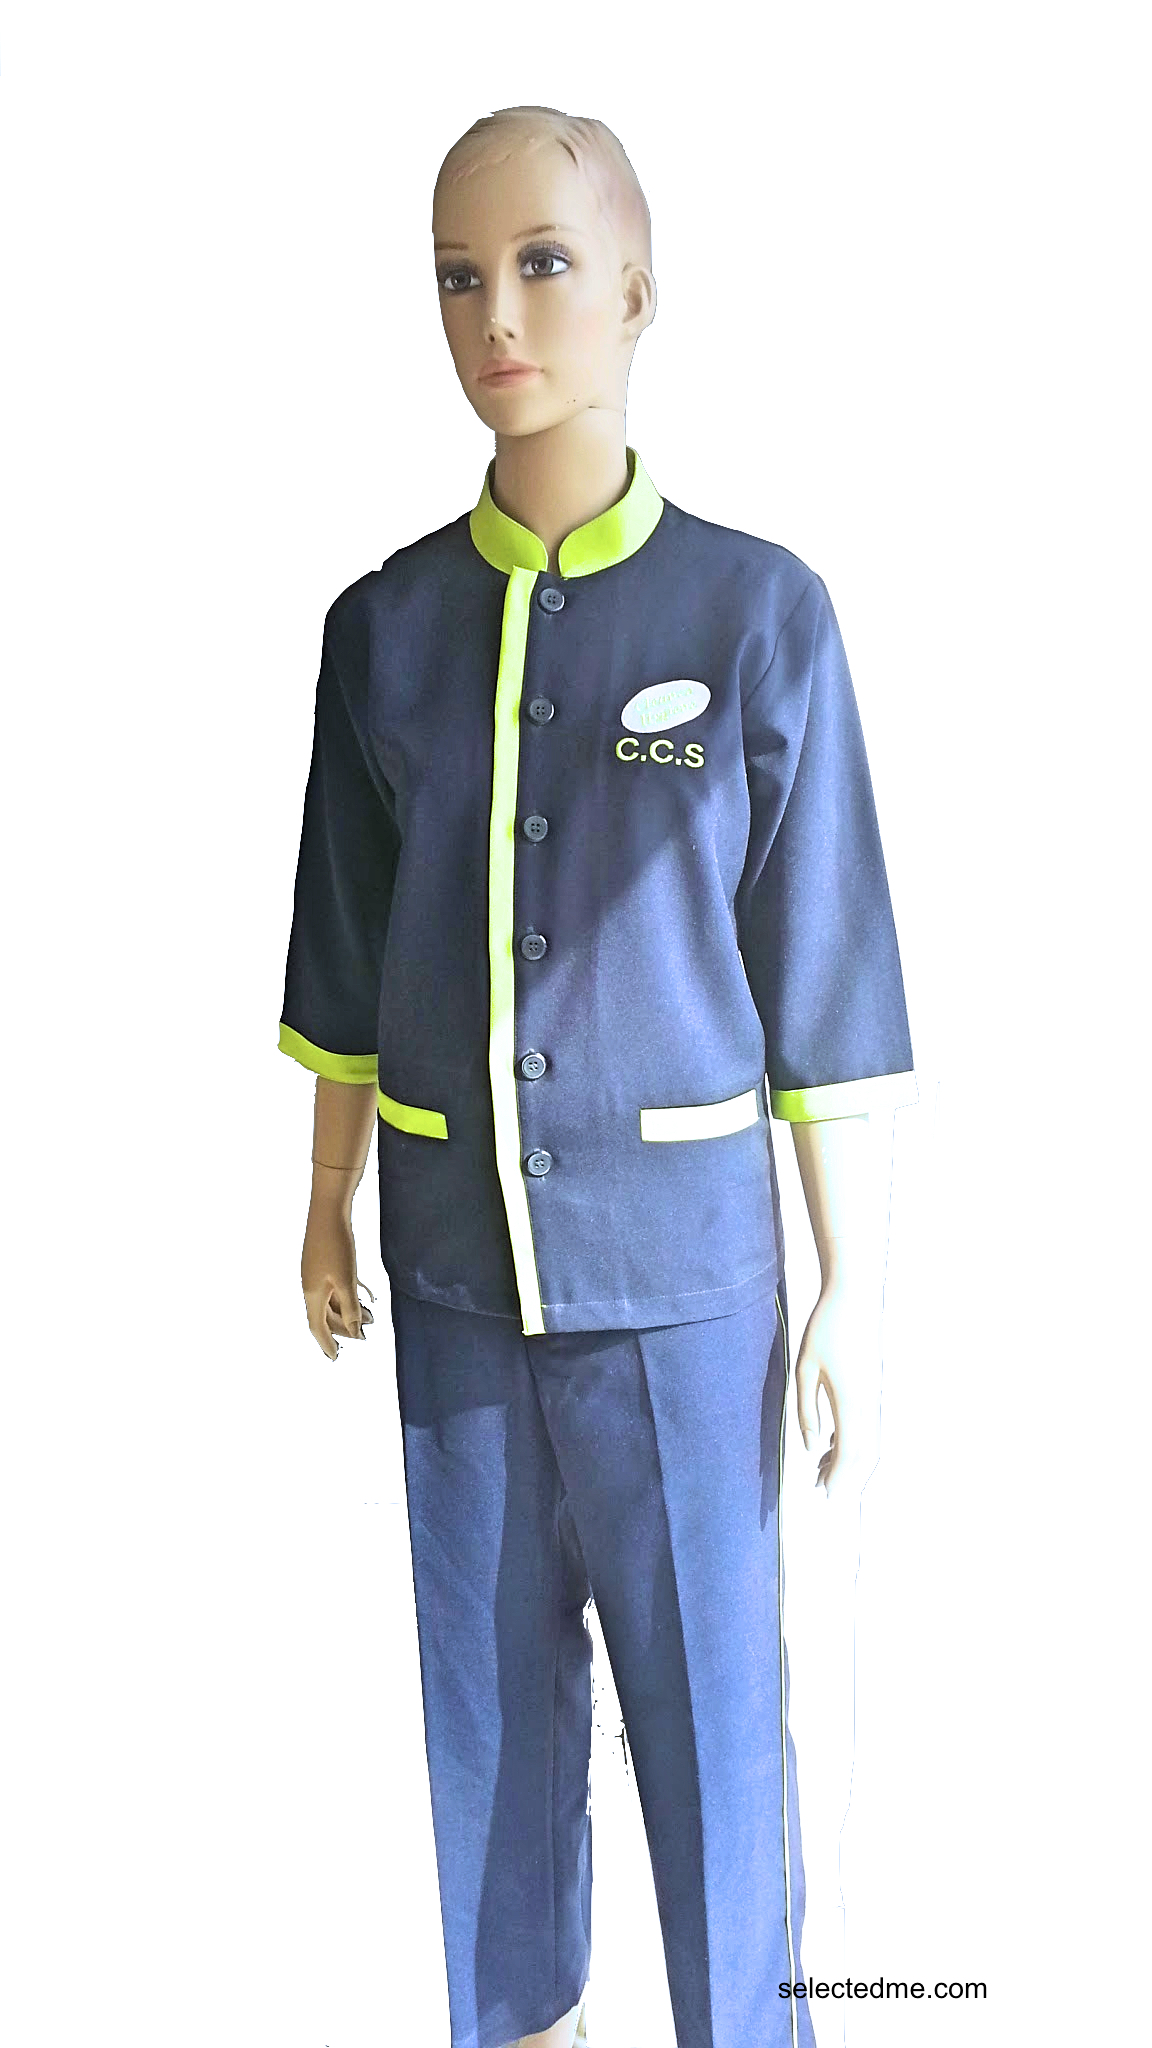 Cleaner uniforms - Maid Uniforms, Hotel housekeeping Uniforms